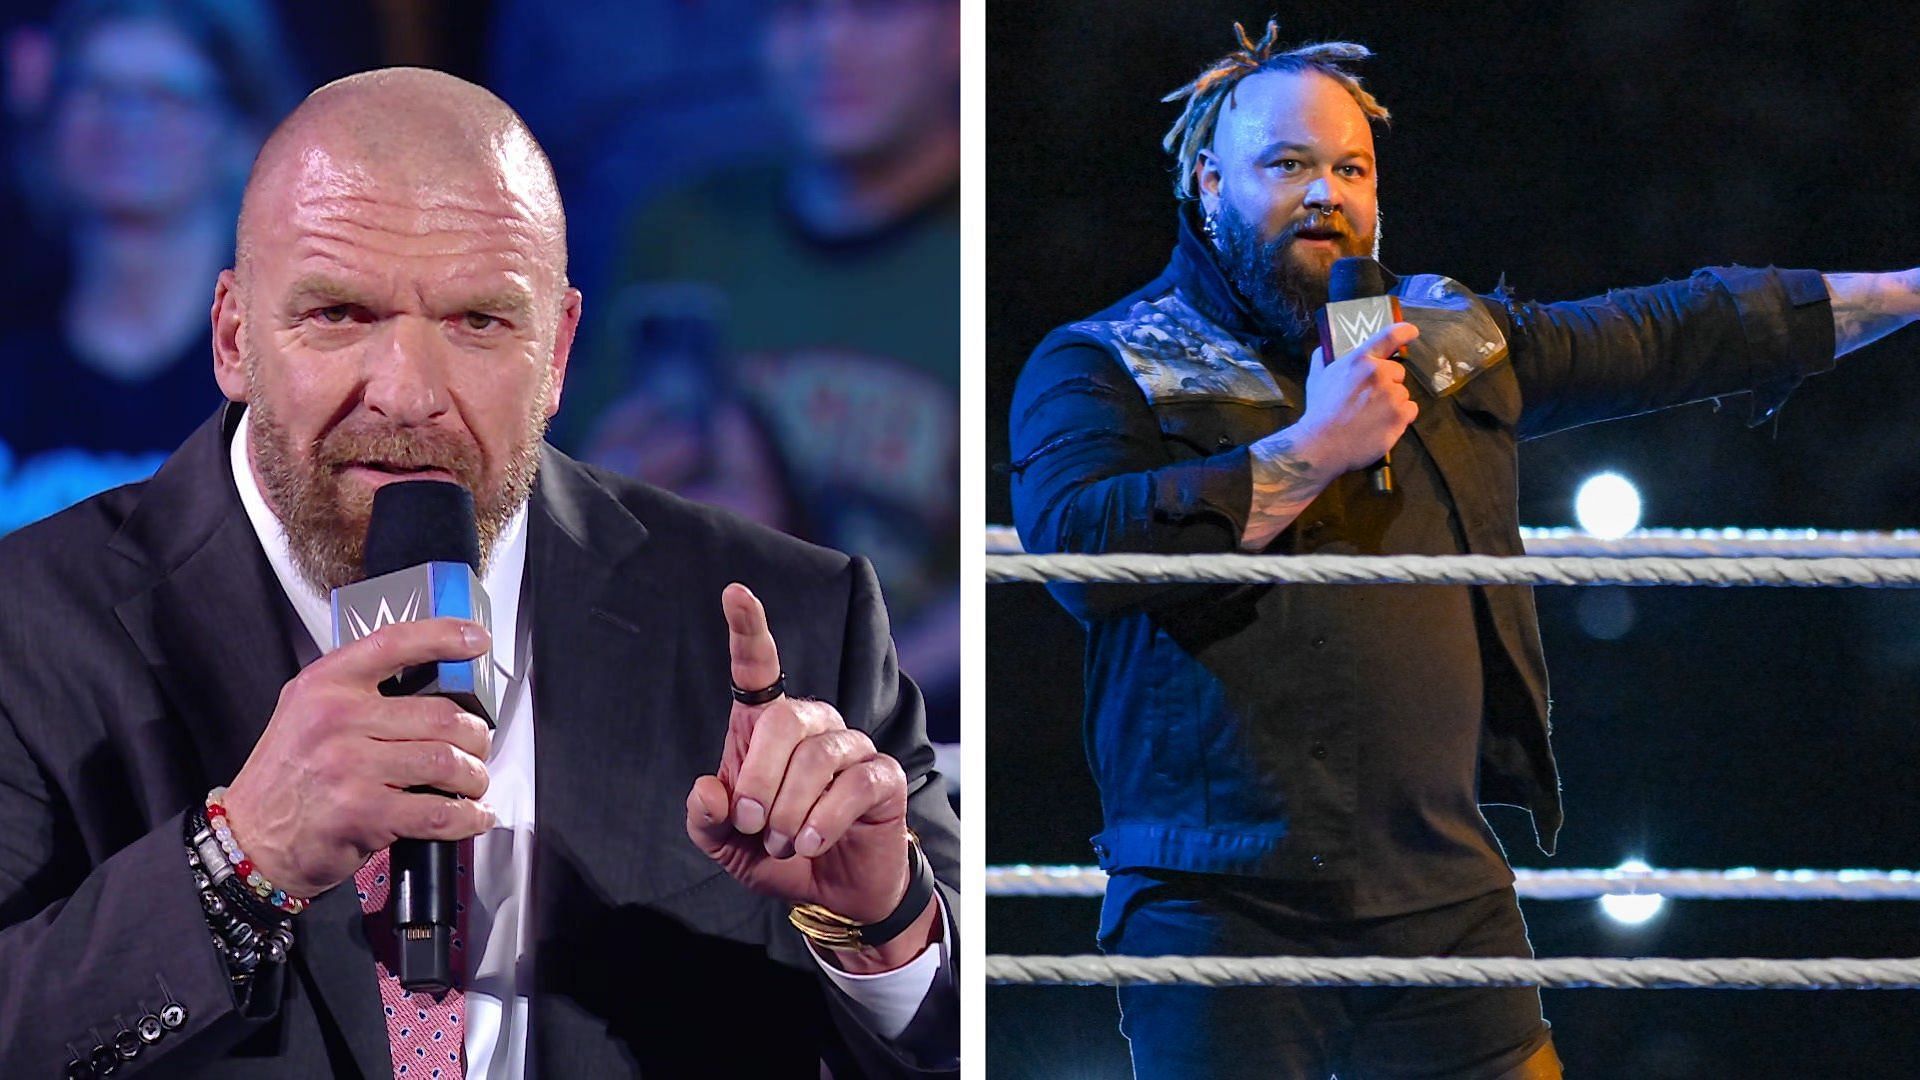 Triple H has brought several stars of the past back to WWE